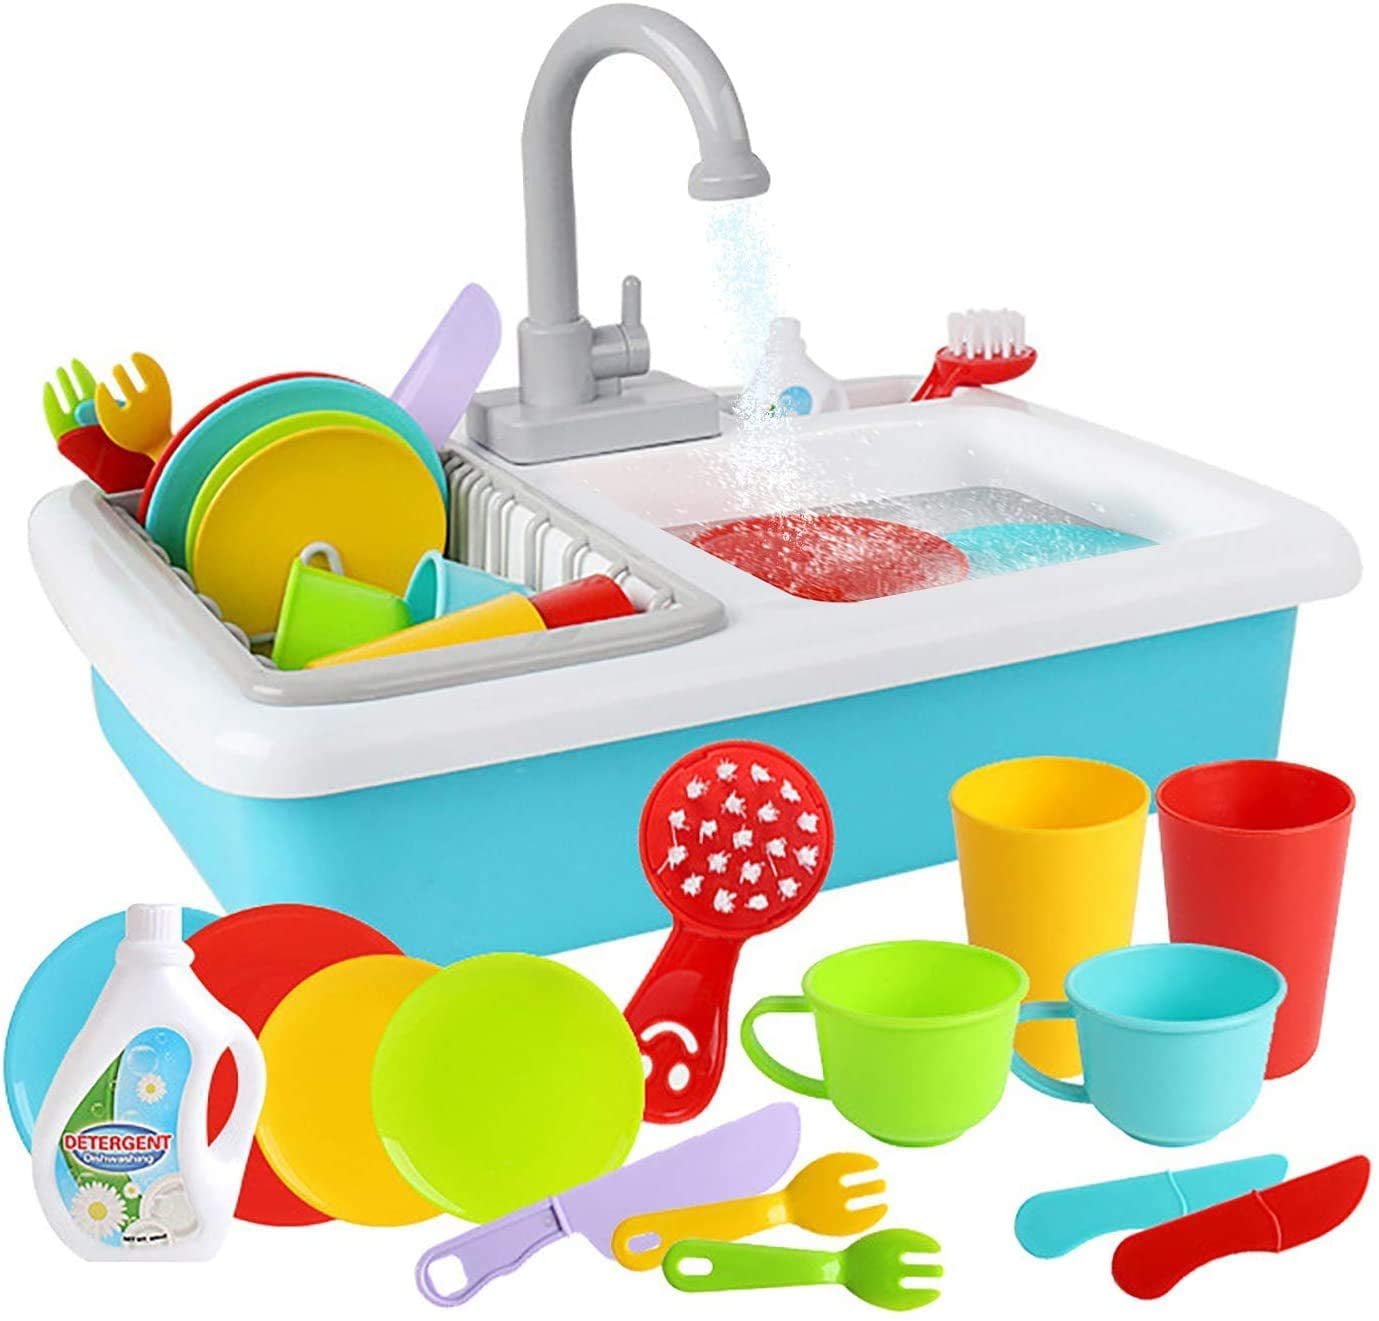 Play Kitchen Accessories Toy Sink Playset with Running Water and Pretend Plates Dishes Utensils Set Dishwasher Cookware Drainer Gift for Kids Toddlers Child Baby Girl and Boy Toys Age 3 4 5 6 7 Year 